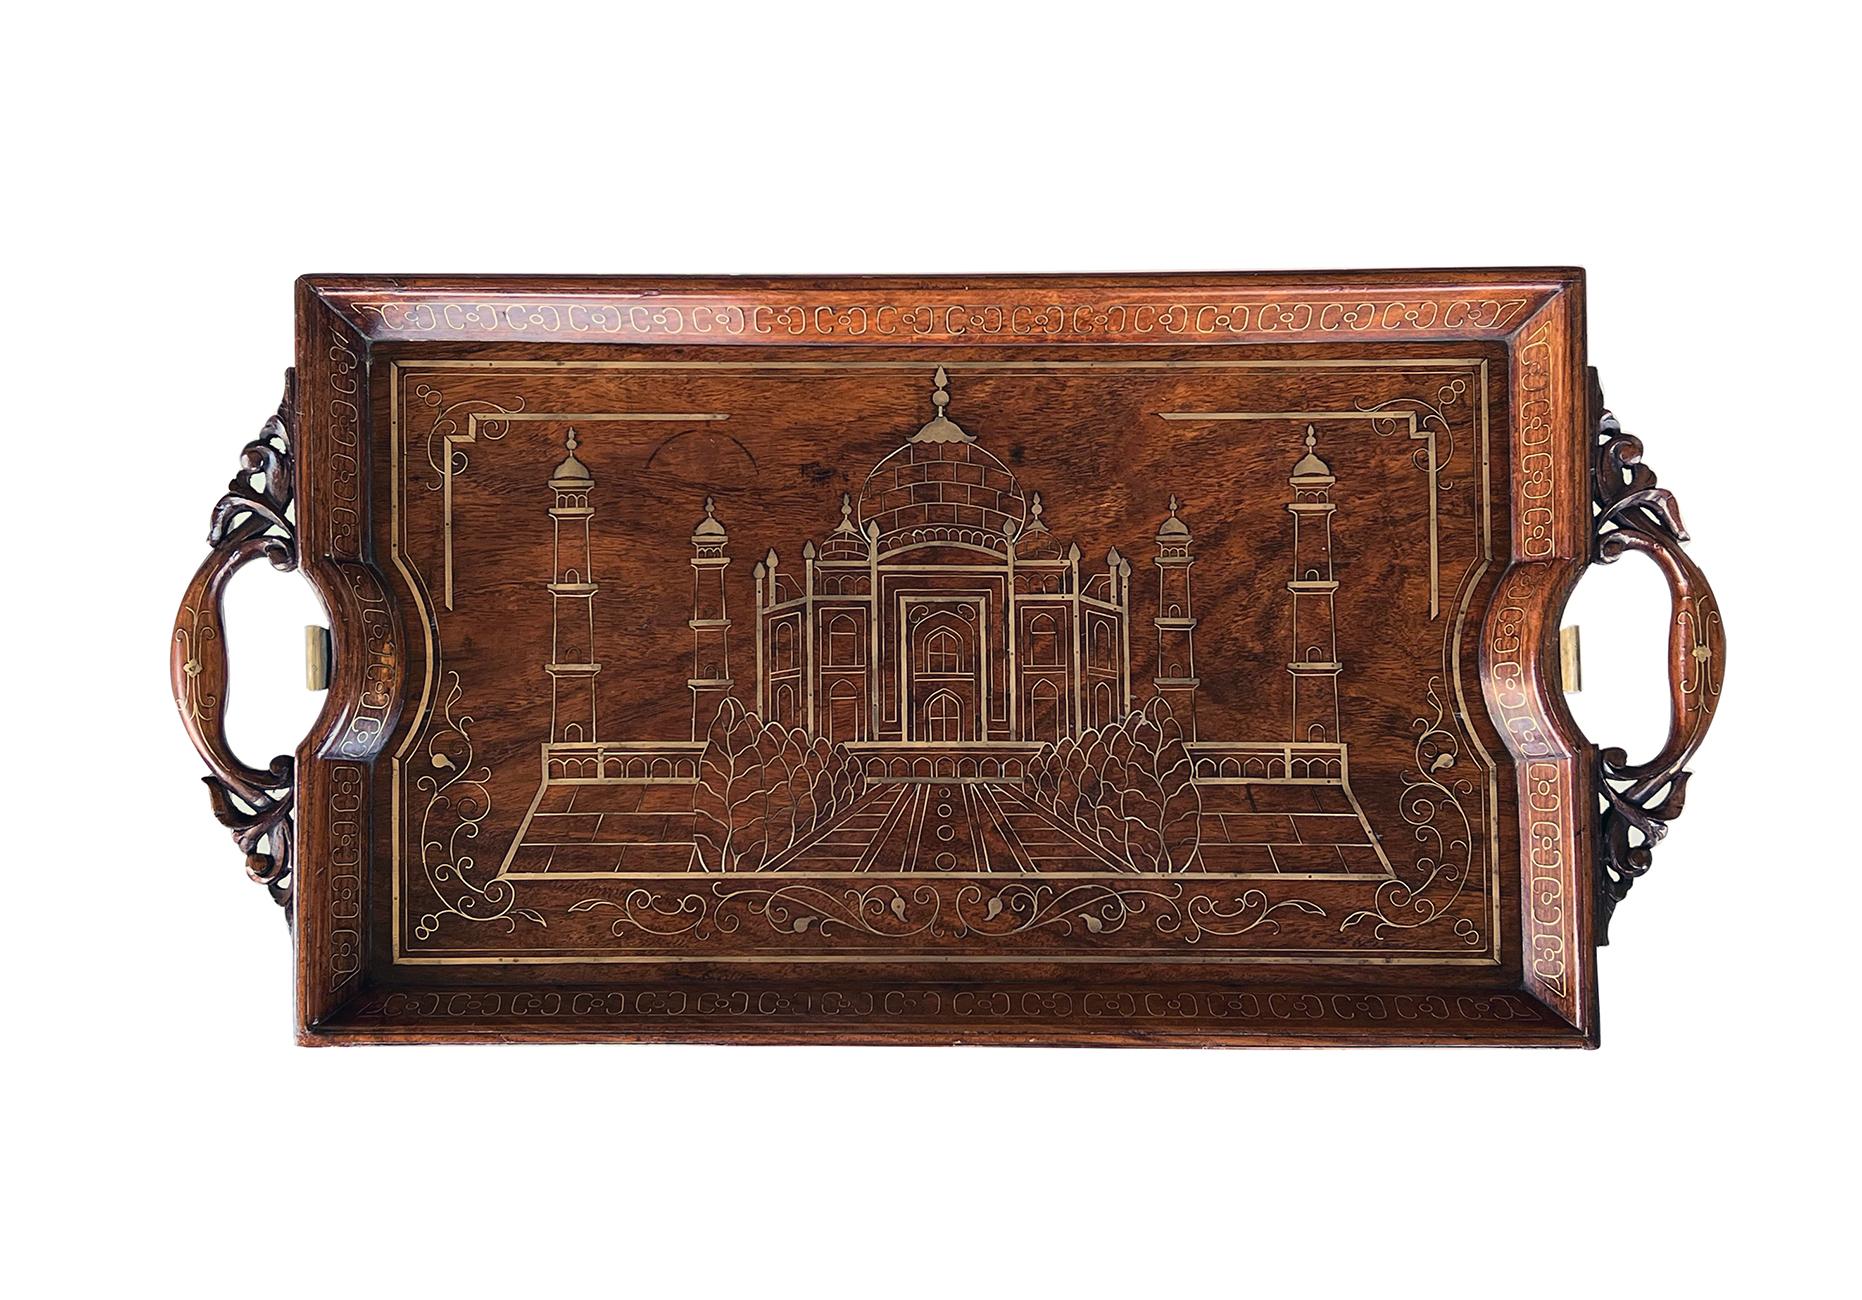 19th Century Anglo Indian Butlers-Style Inlaid Wooden Traveling Table Depicting Taj Mahal